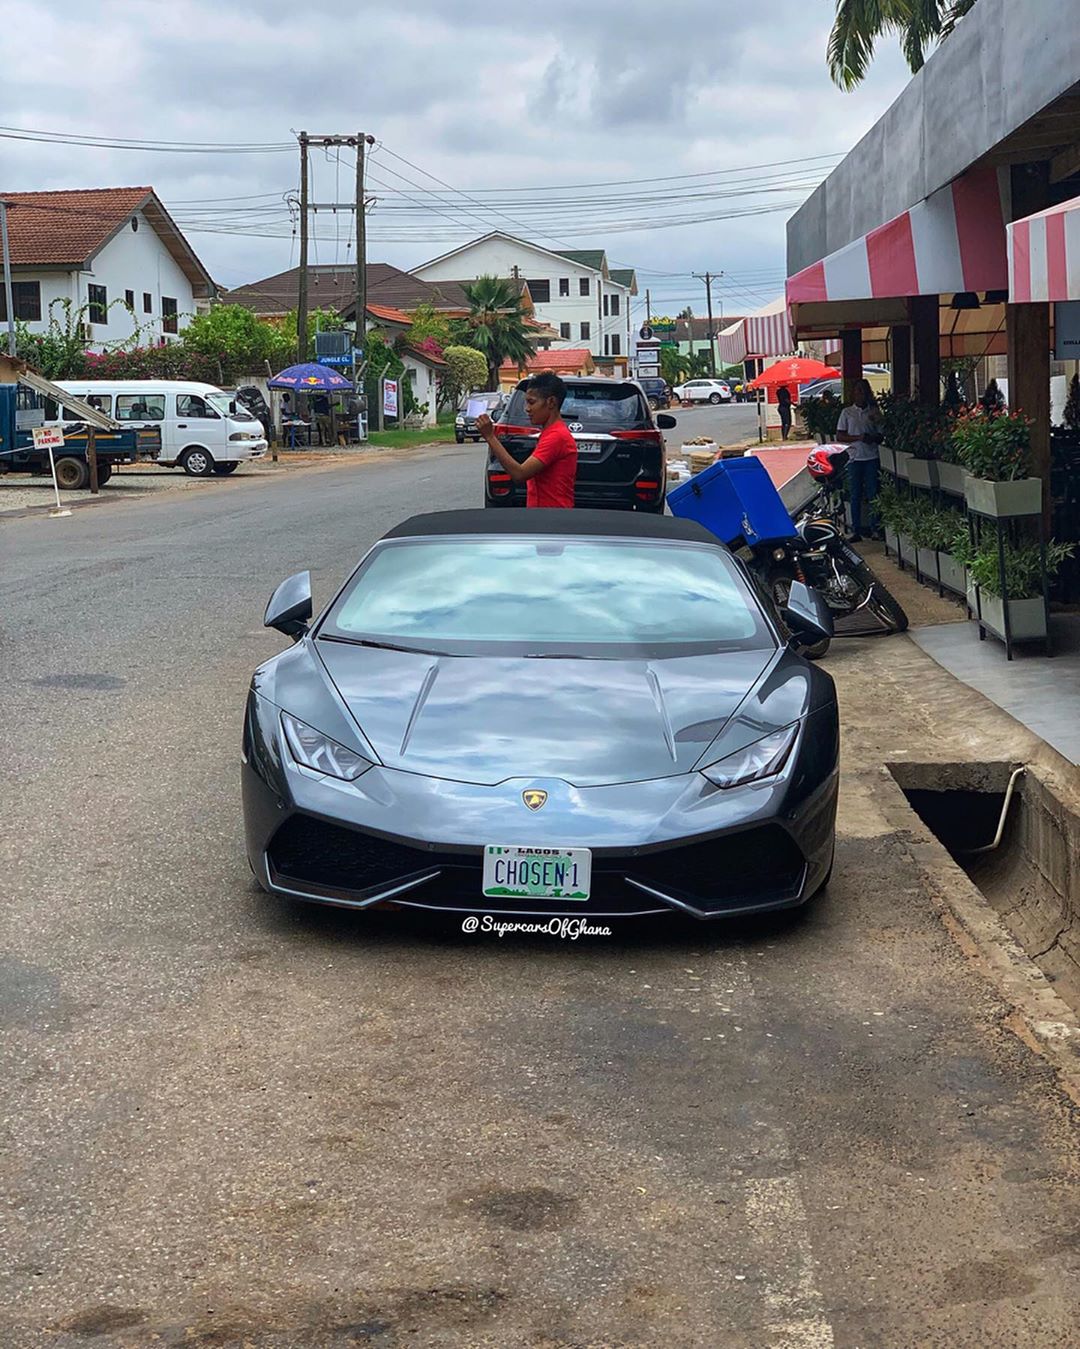 Photos drop as stolen Lamborghini worth almost GHc1.5 million is traced to Ghana